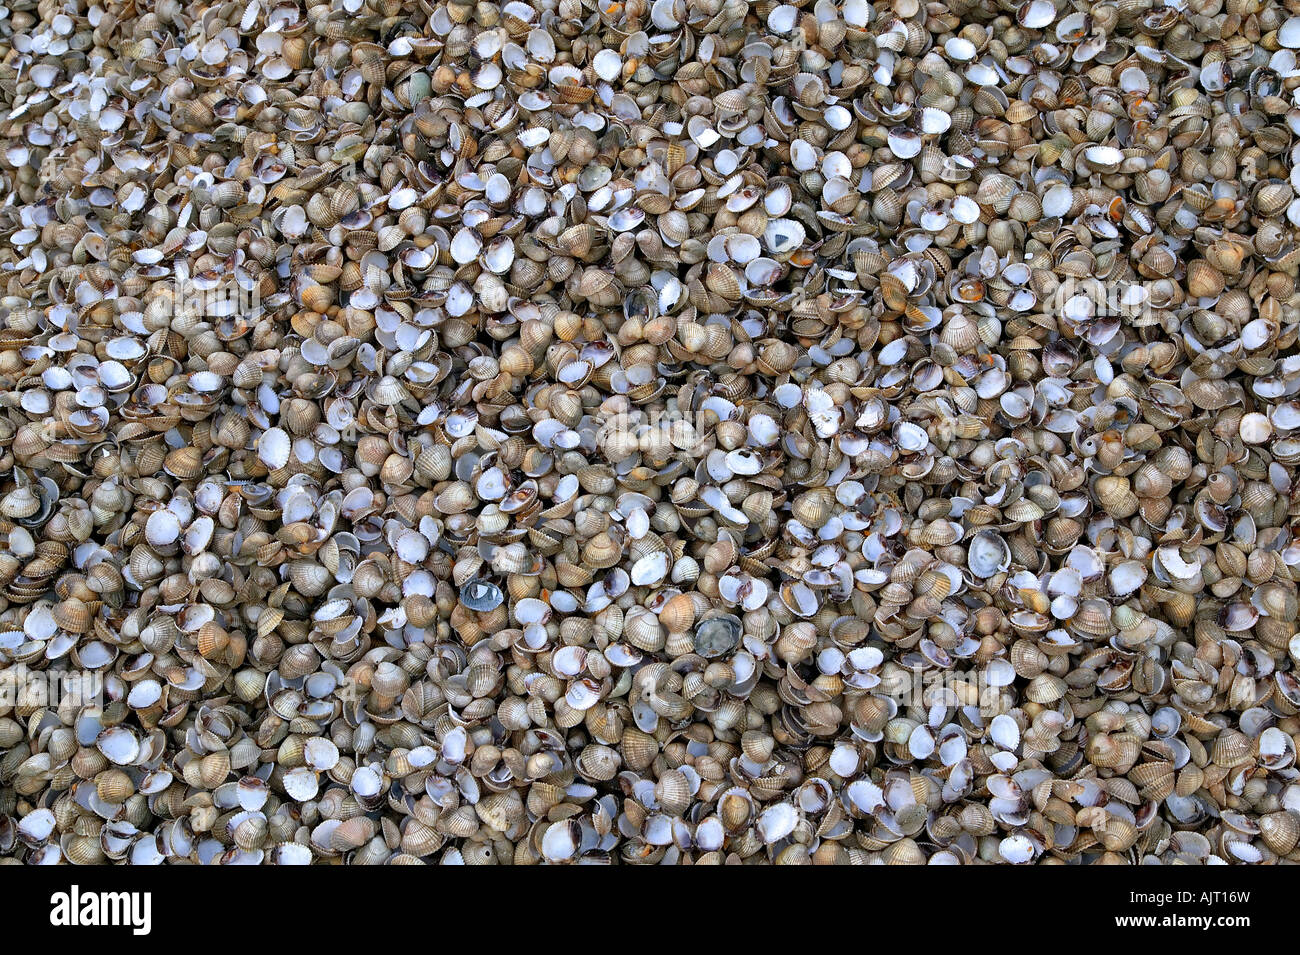 Thousands of sea shells try and count them all Stock Photo